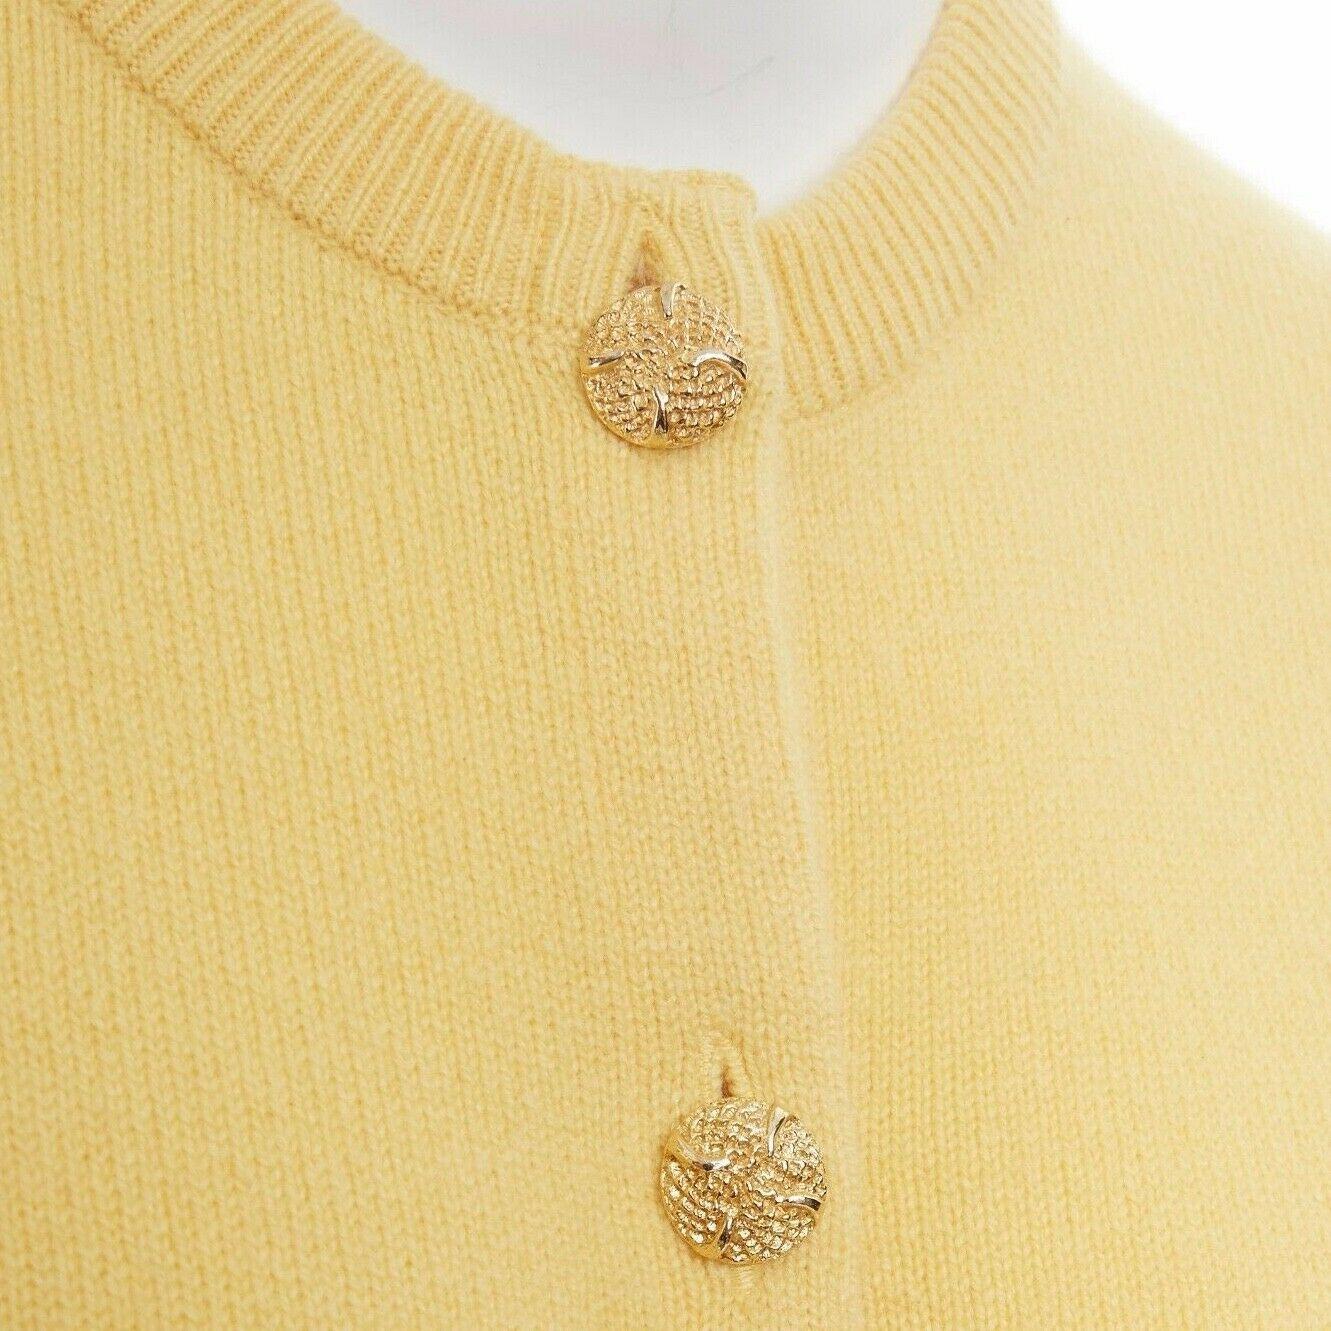 BALLANTYNE 100% pure cashmere yellow gold-tone button cardigan sweater IT44

BALLANTYNE
100% pure cashmere. Yellow. Ribbed round neckline. Gold-tone decorative vintage buttons. Button front closure. Long sleeves. Regular fit. Cardigan sweater. Made